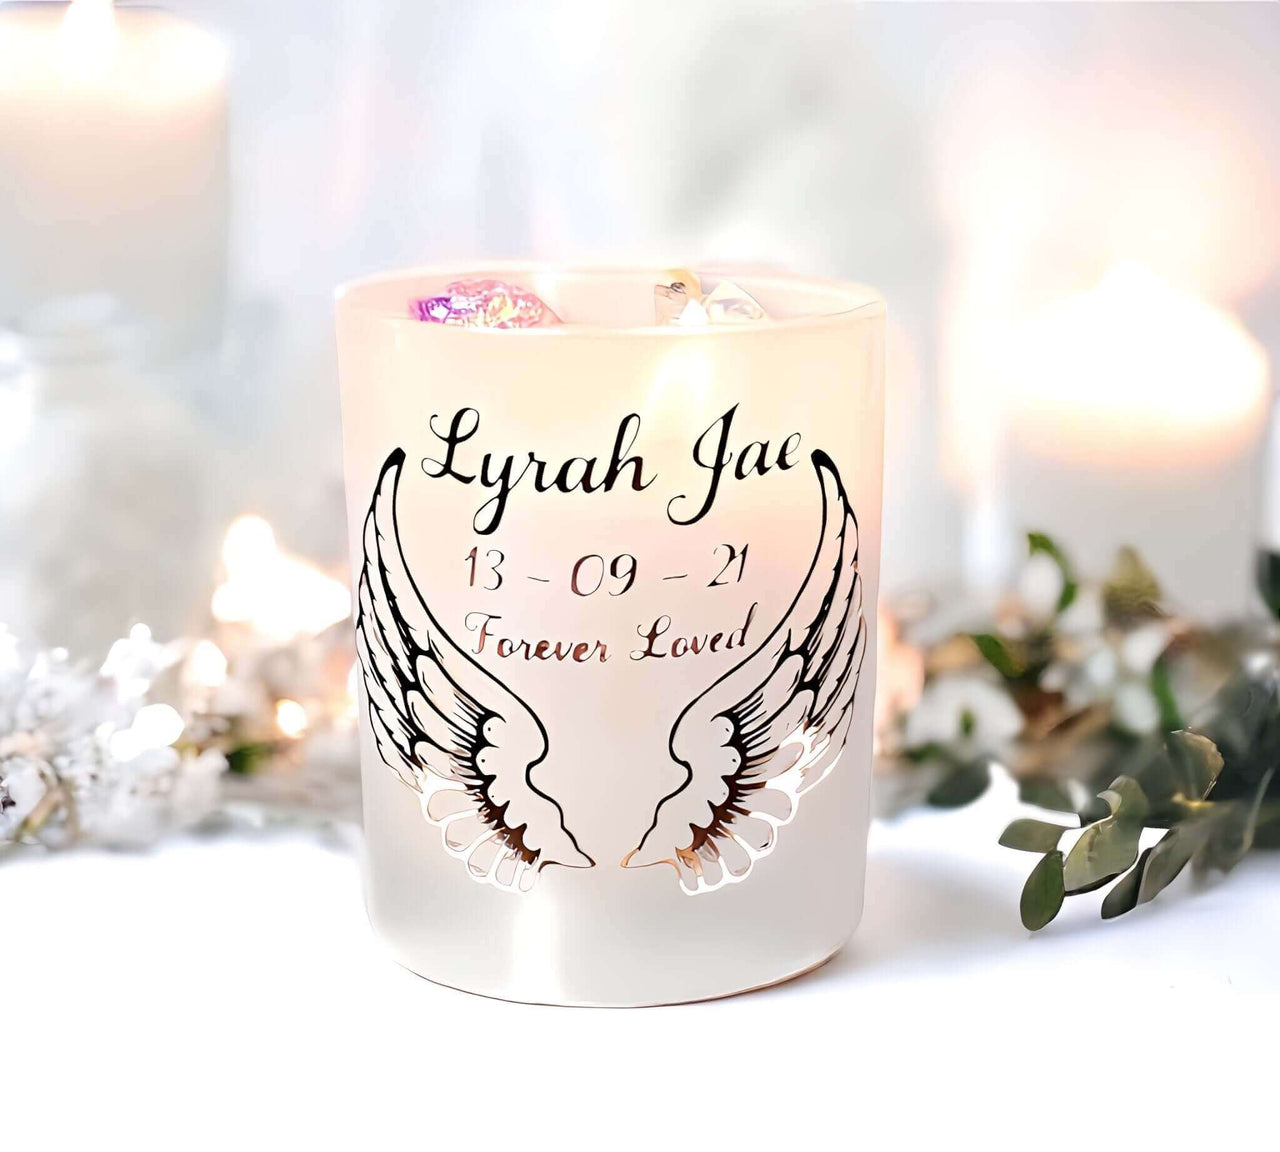 White Bereavement Candles. These handcrafted sympathy candles offer comfort and remembrance in times of loss